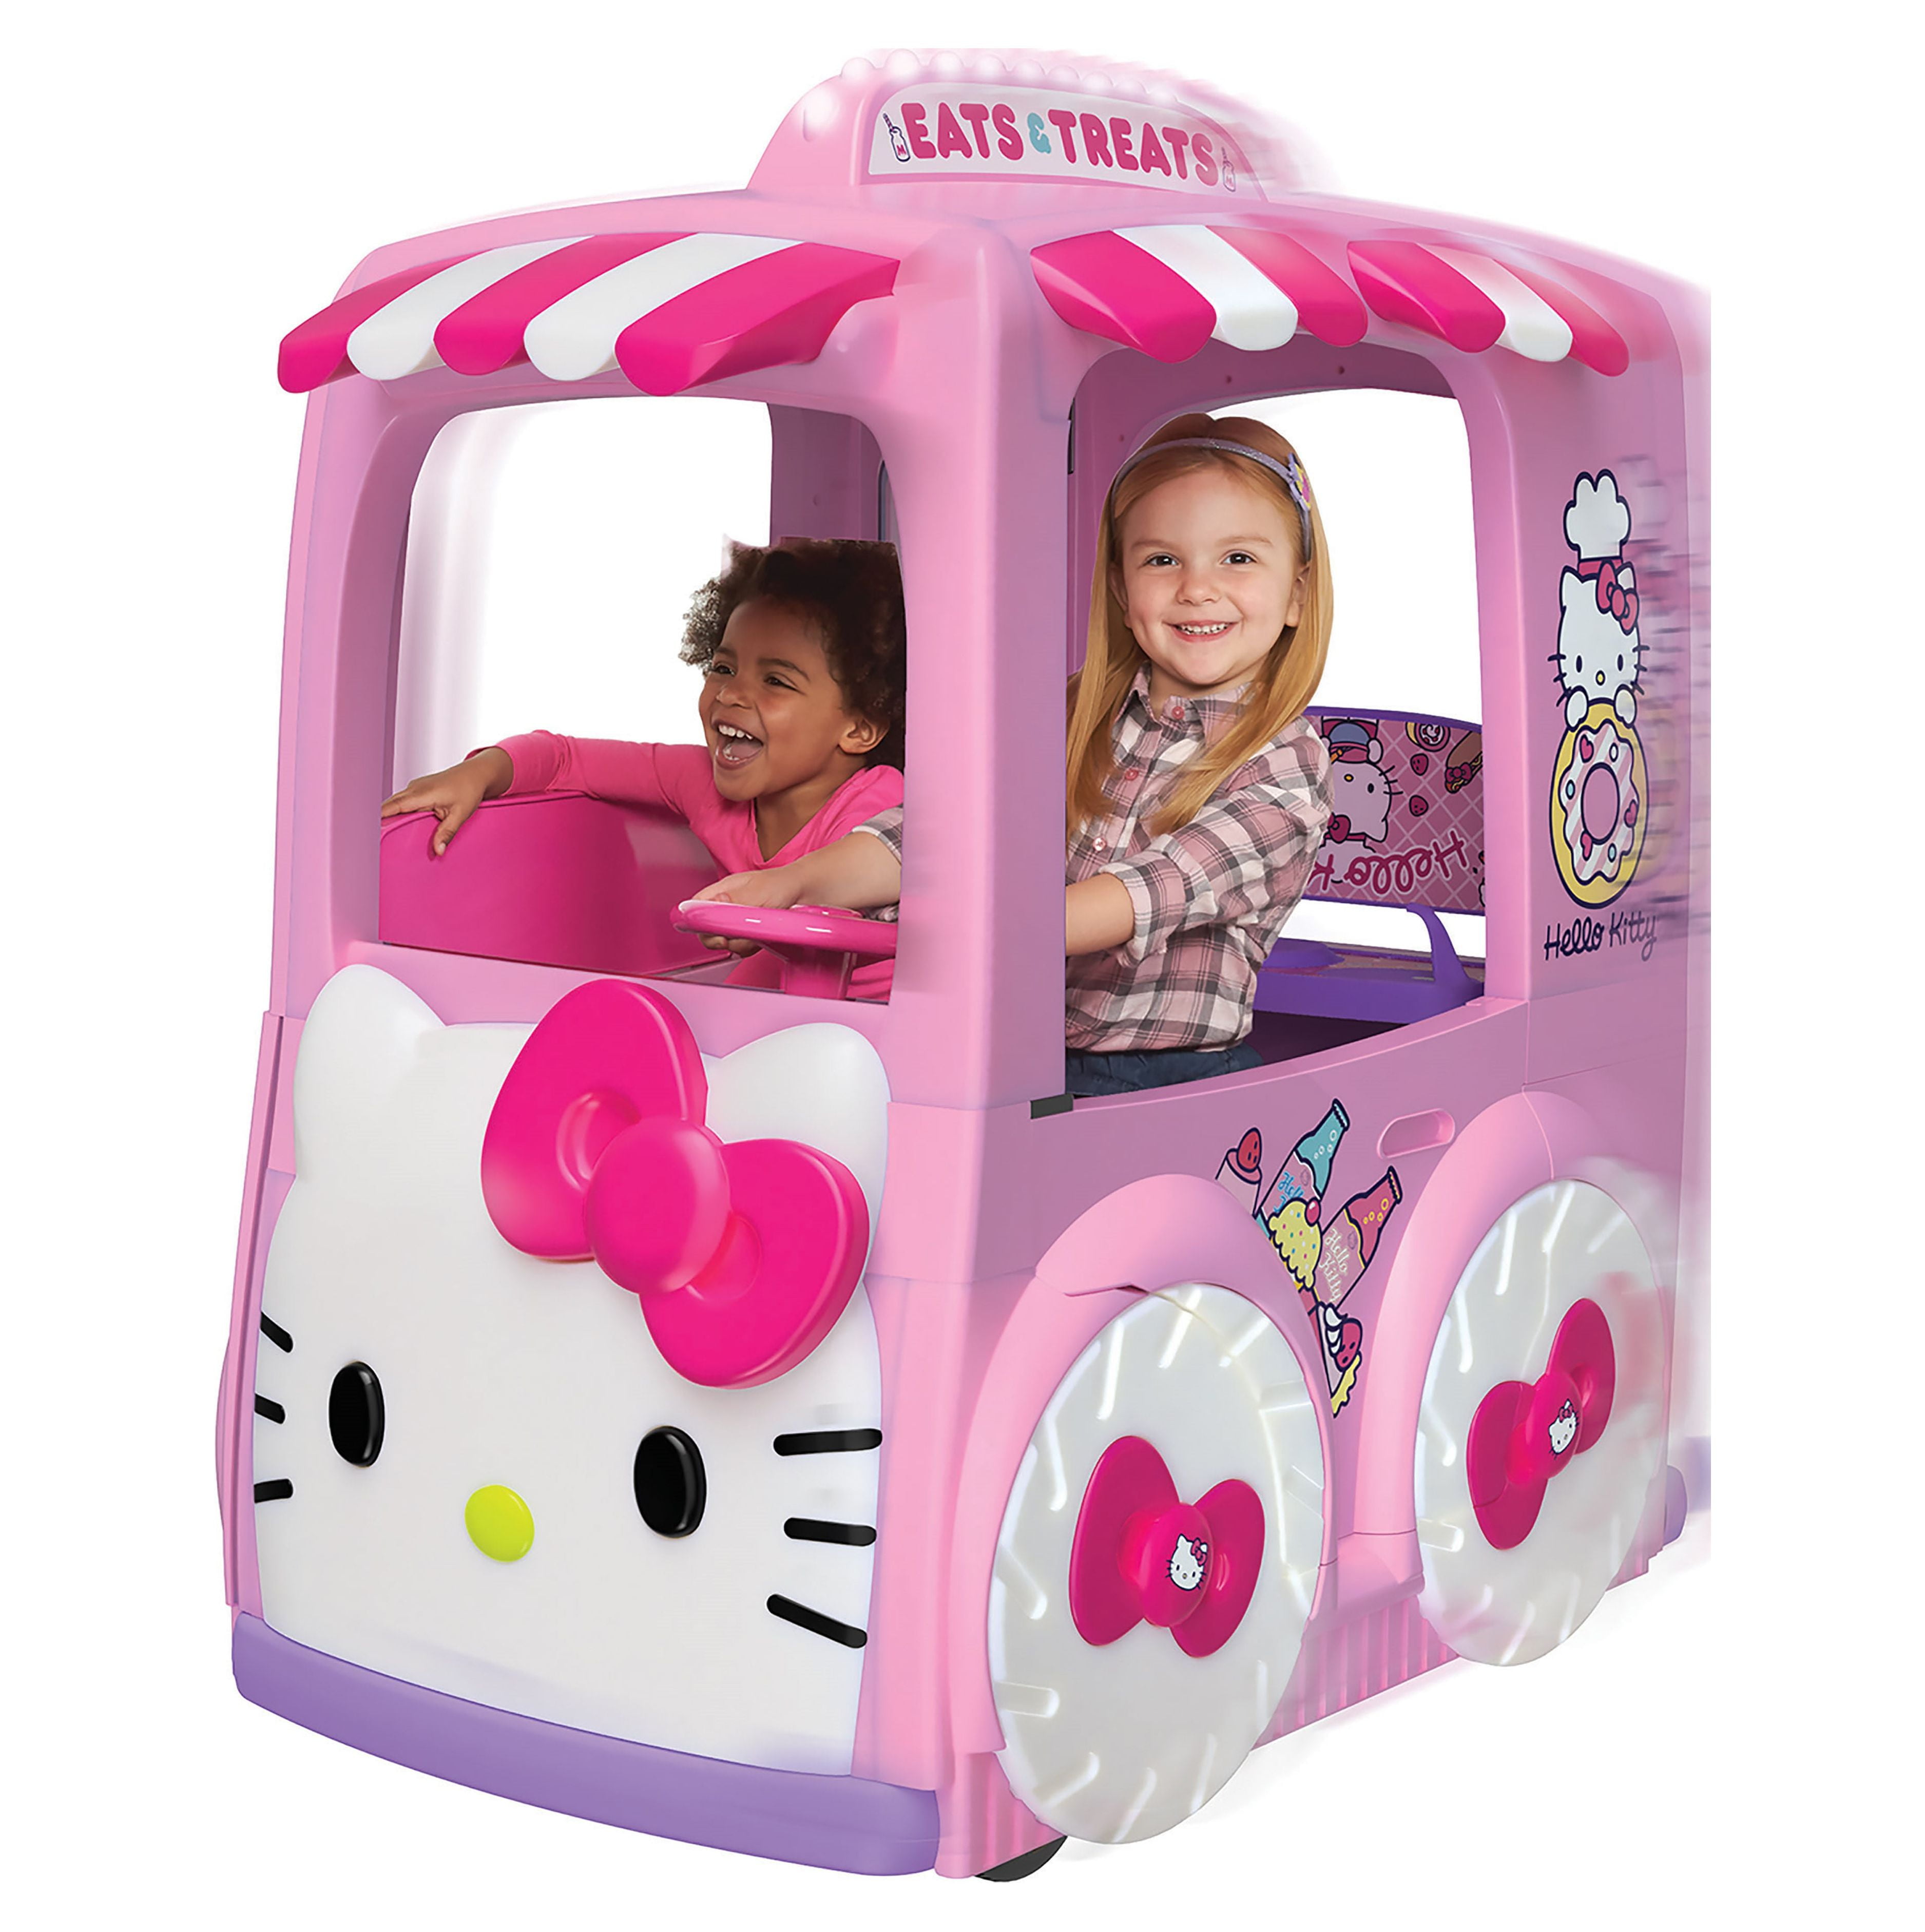 Shop Hello Kitty Office Supplies with great discounts and prices